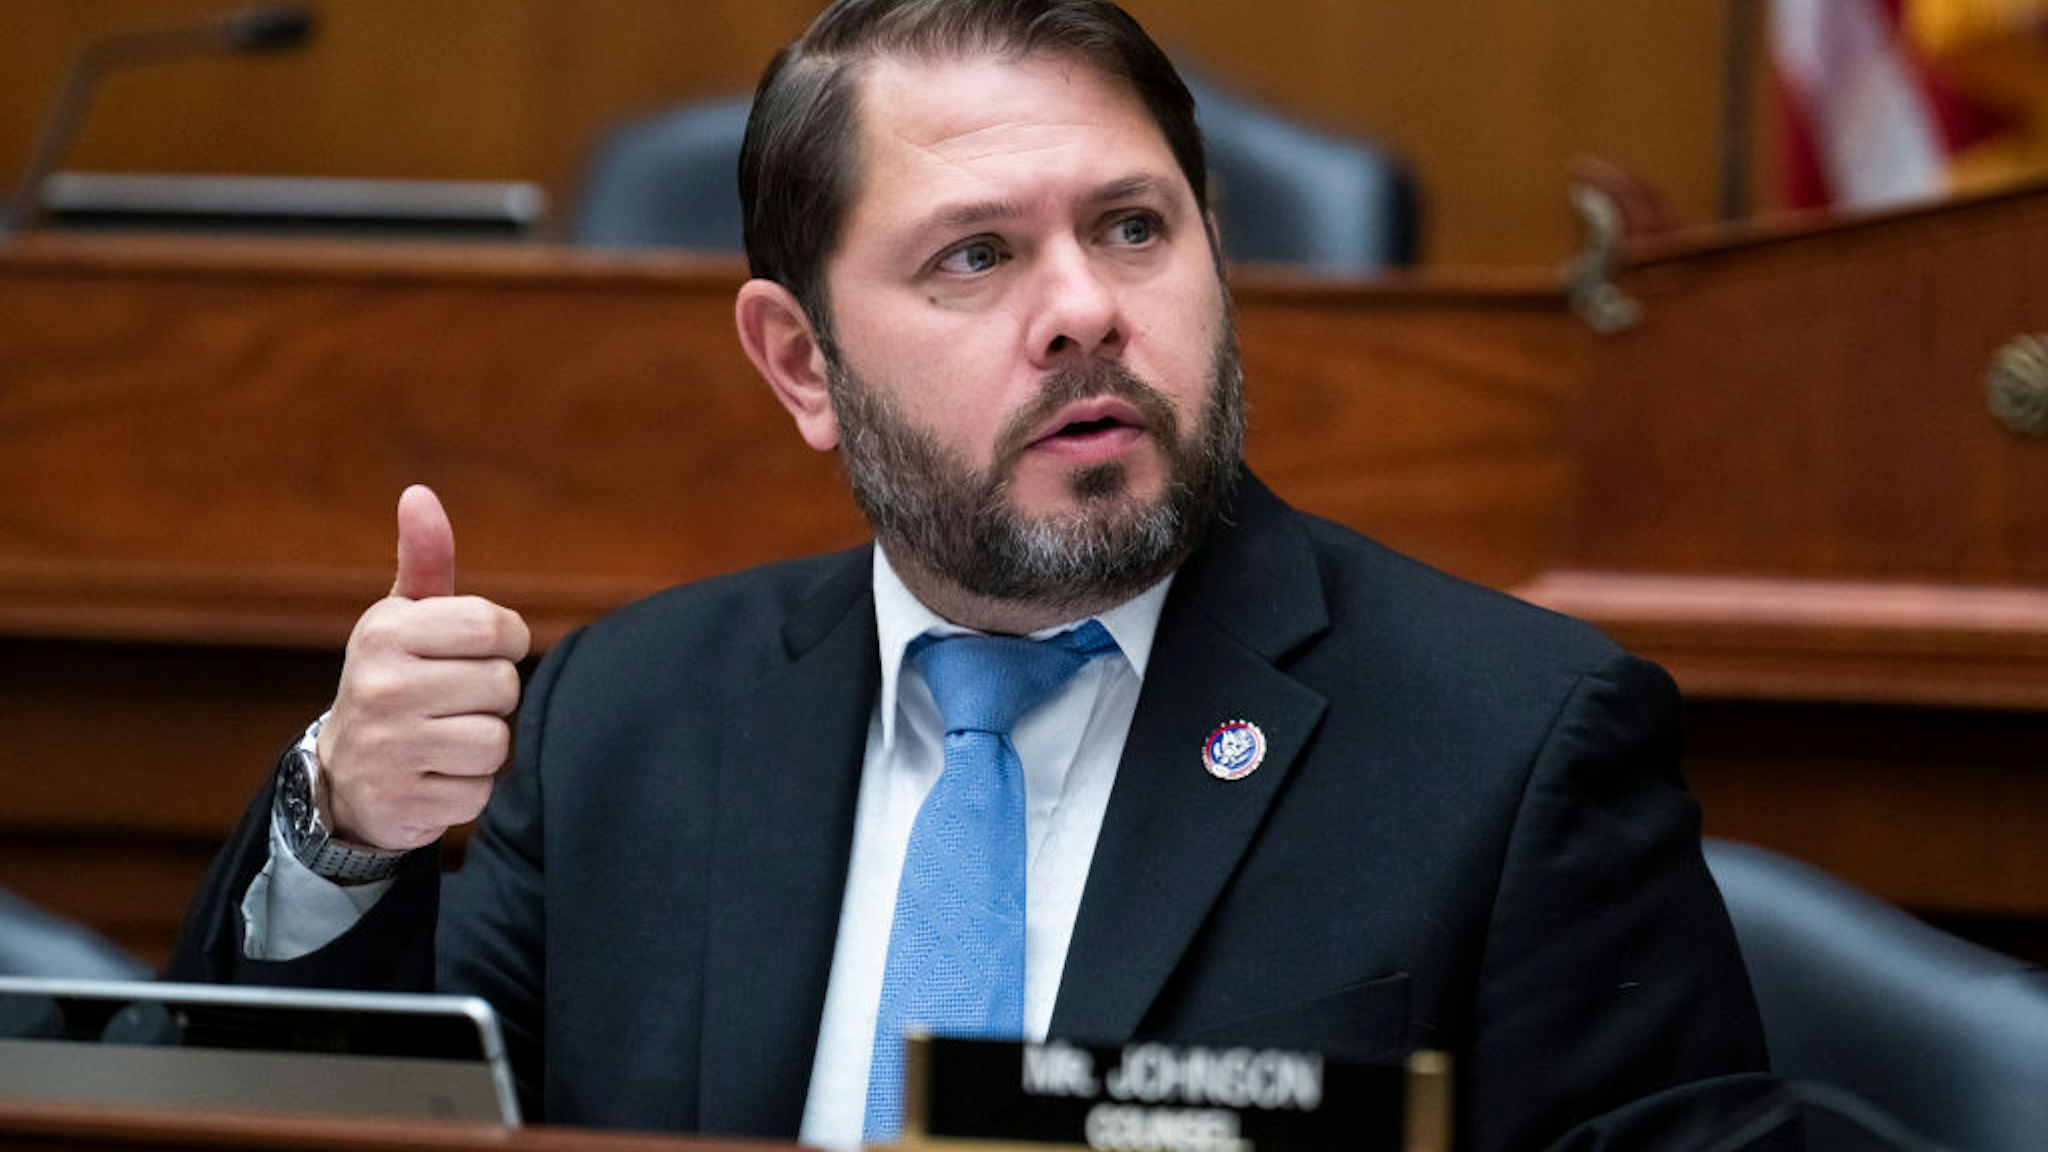 UNITED STATES - JUNE 9: Chairman Ruben Gallego, D-Ariz., conducts the House Armed Services Subcommittee on Intelligence and Special Operations markup of the National Defense Authorization Act for Fiscal Year 2023, in Rayburn Building on Thursday, June 9, 2022. (Tom Williams/CQ-Roll Call, Inc via Getty Images)